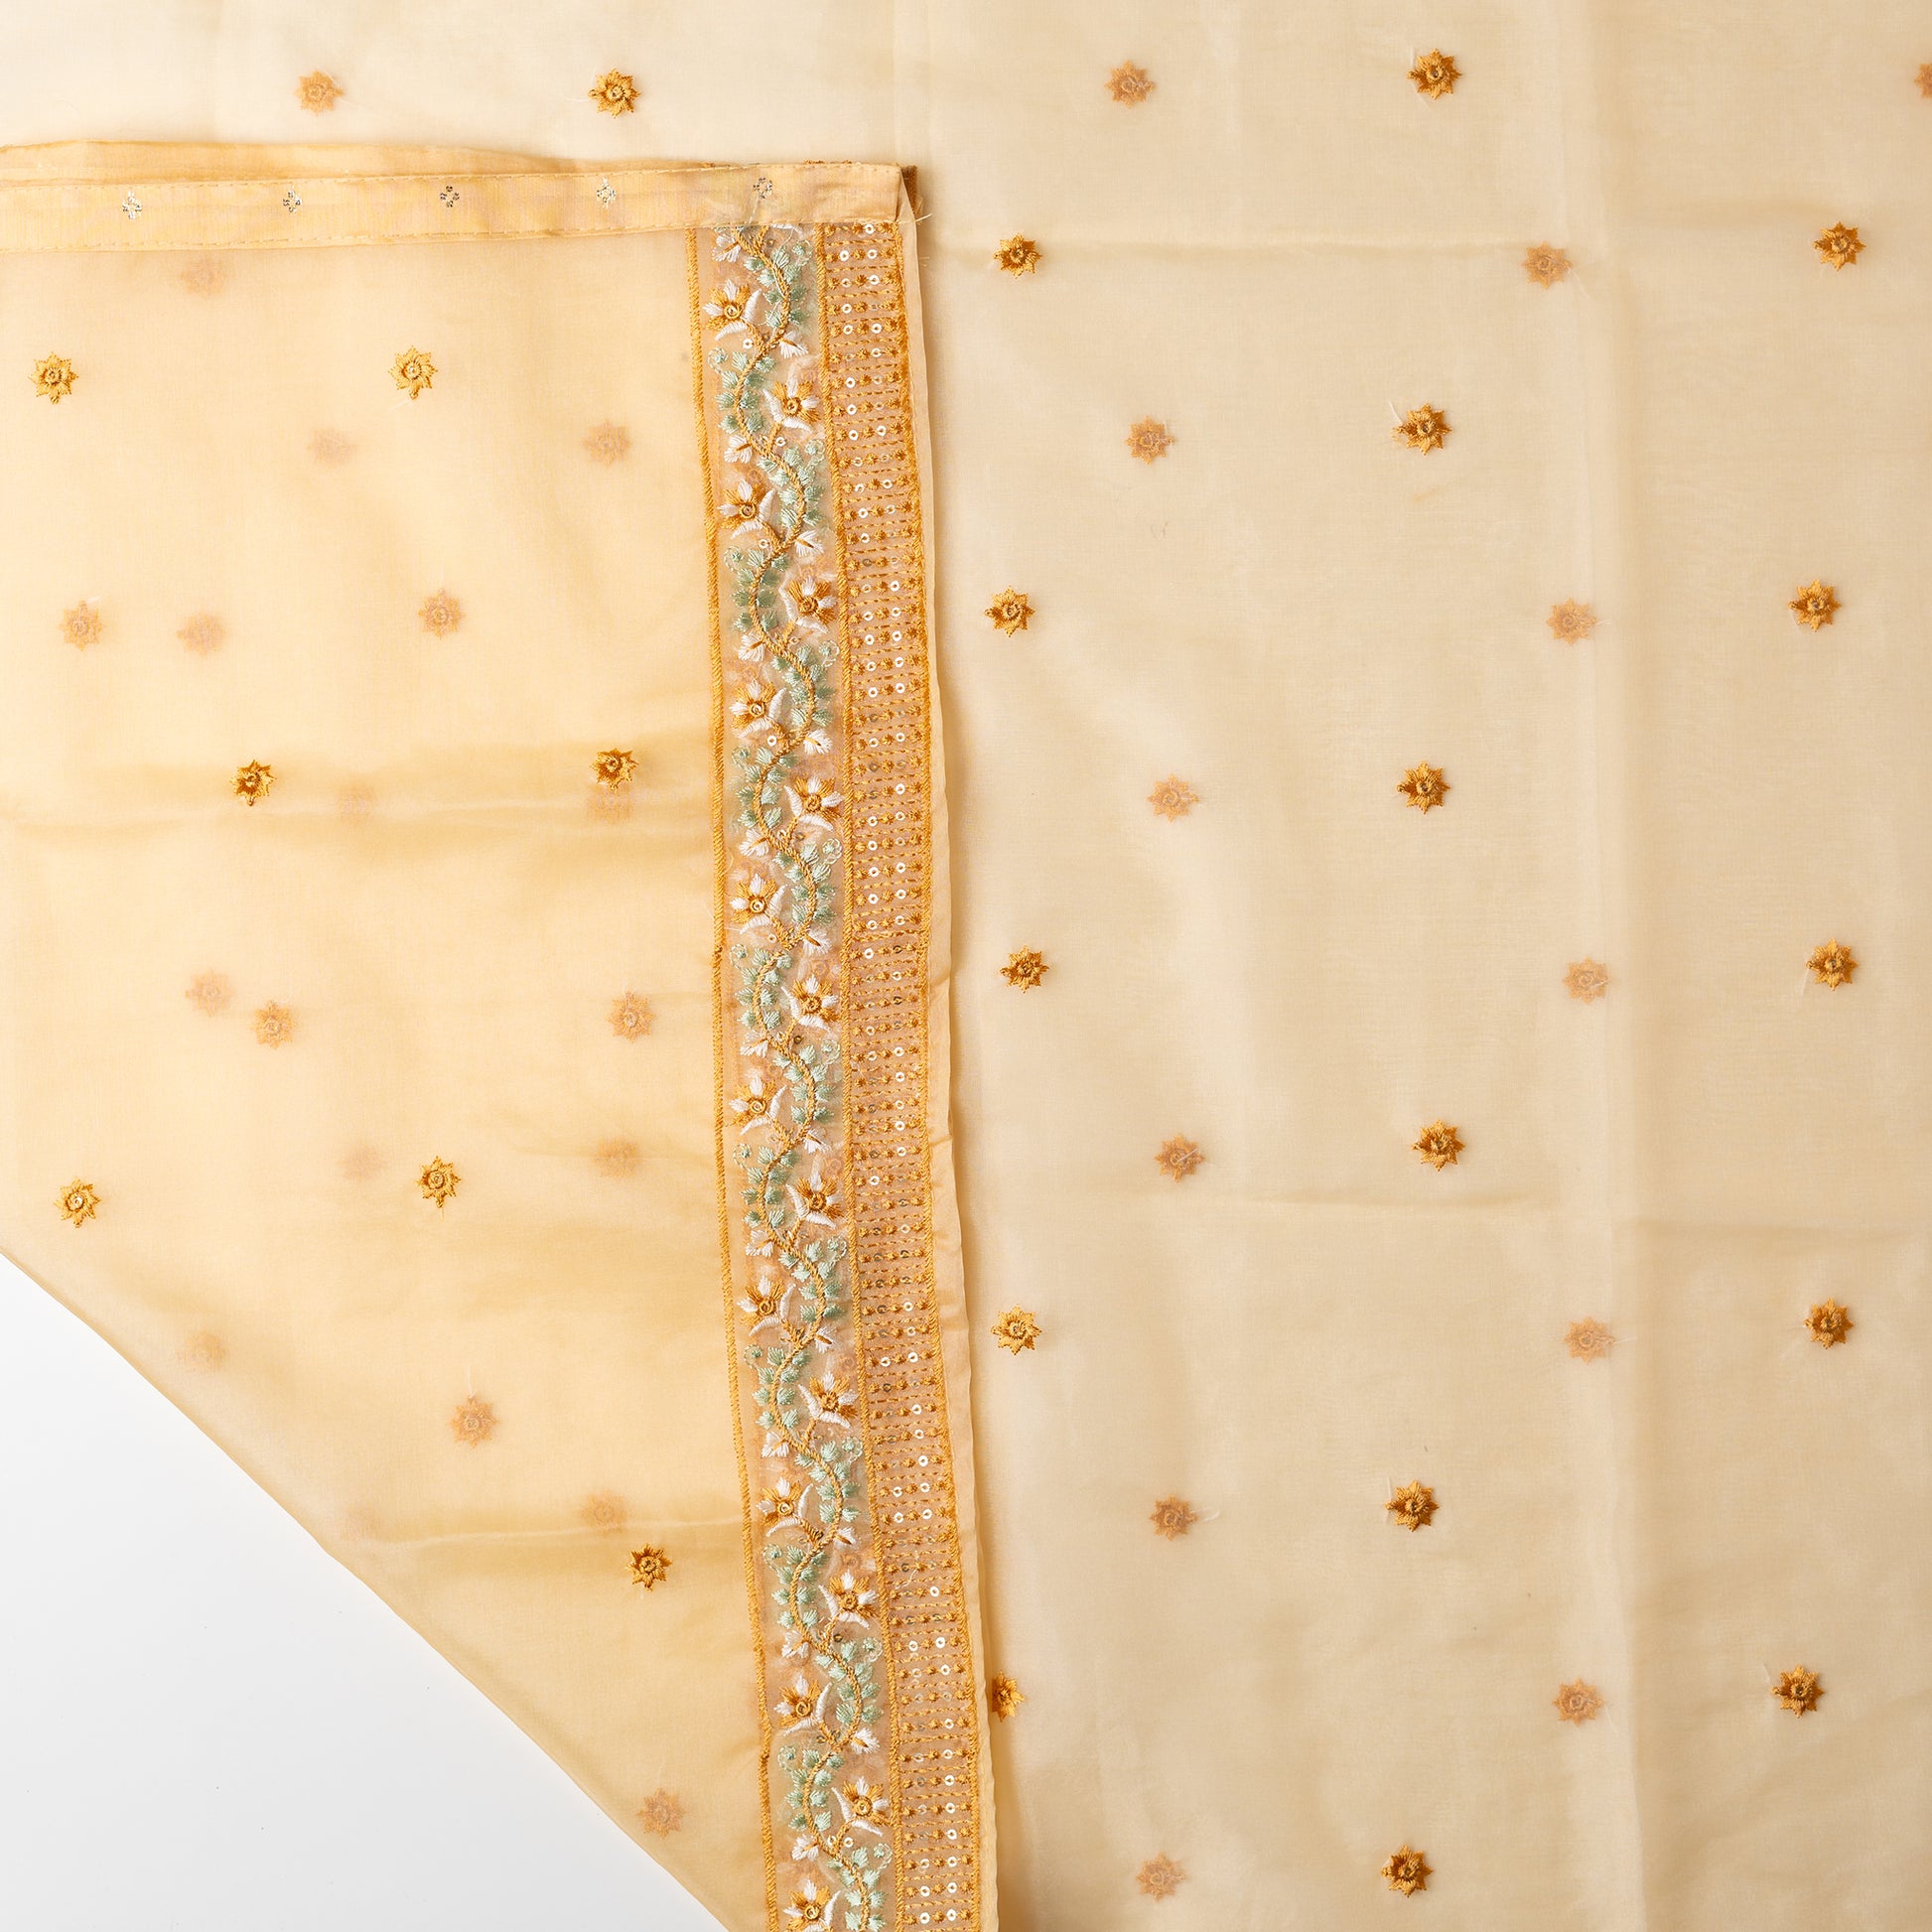 Beautiful silk dupatta with floral embroidery and the borders are perfectly in sync with the top border, embroidery work and sequins.